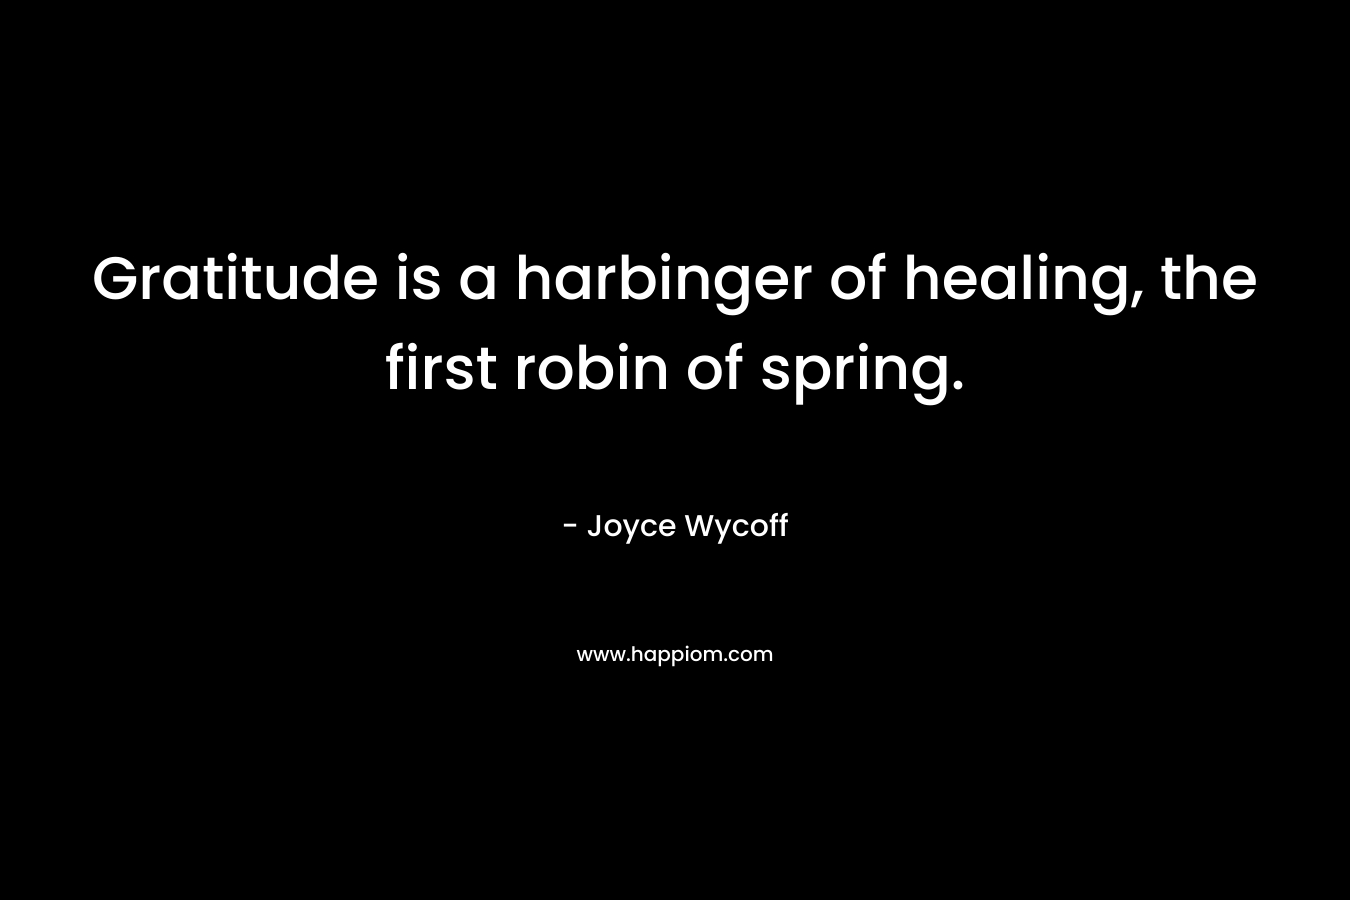 Gratitude is a harbinger of healing, the first robin of spring. – Joyce Wycoff